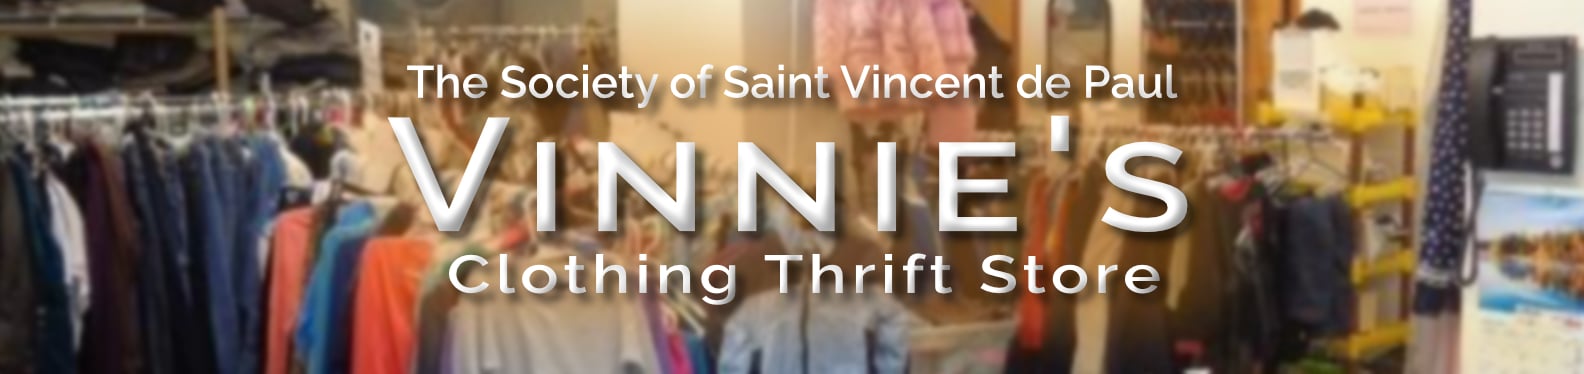 Vinnies clothing thrift store showing racks of clothes on hangers